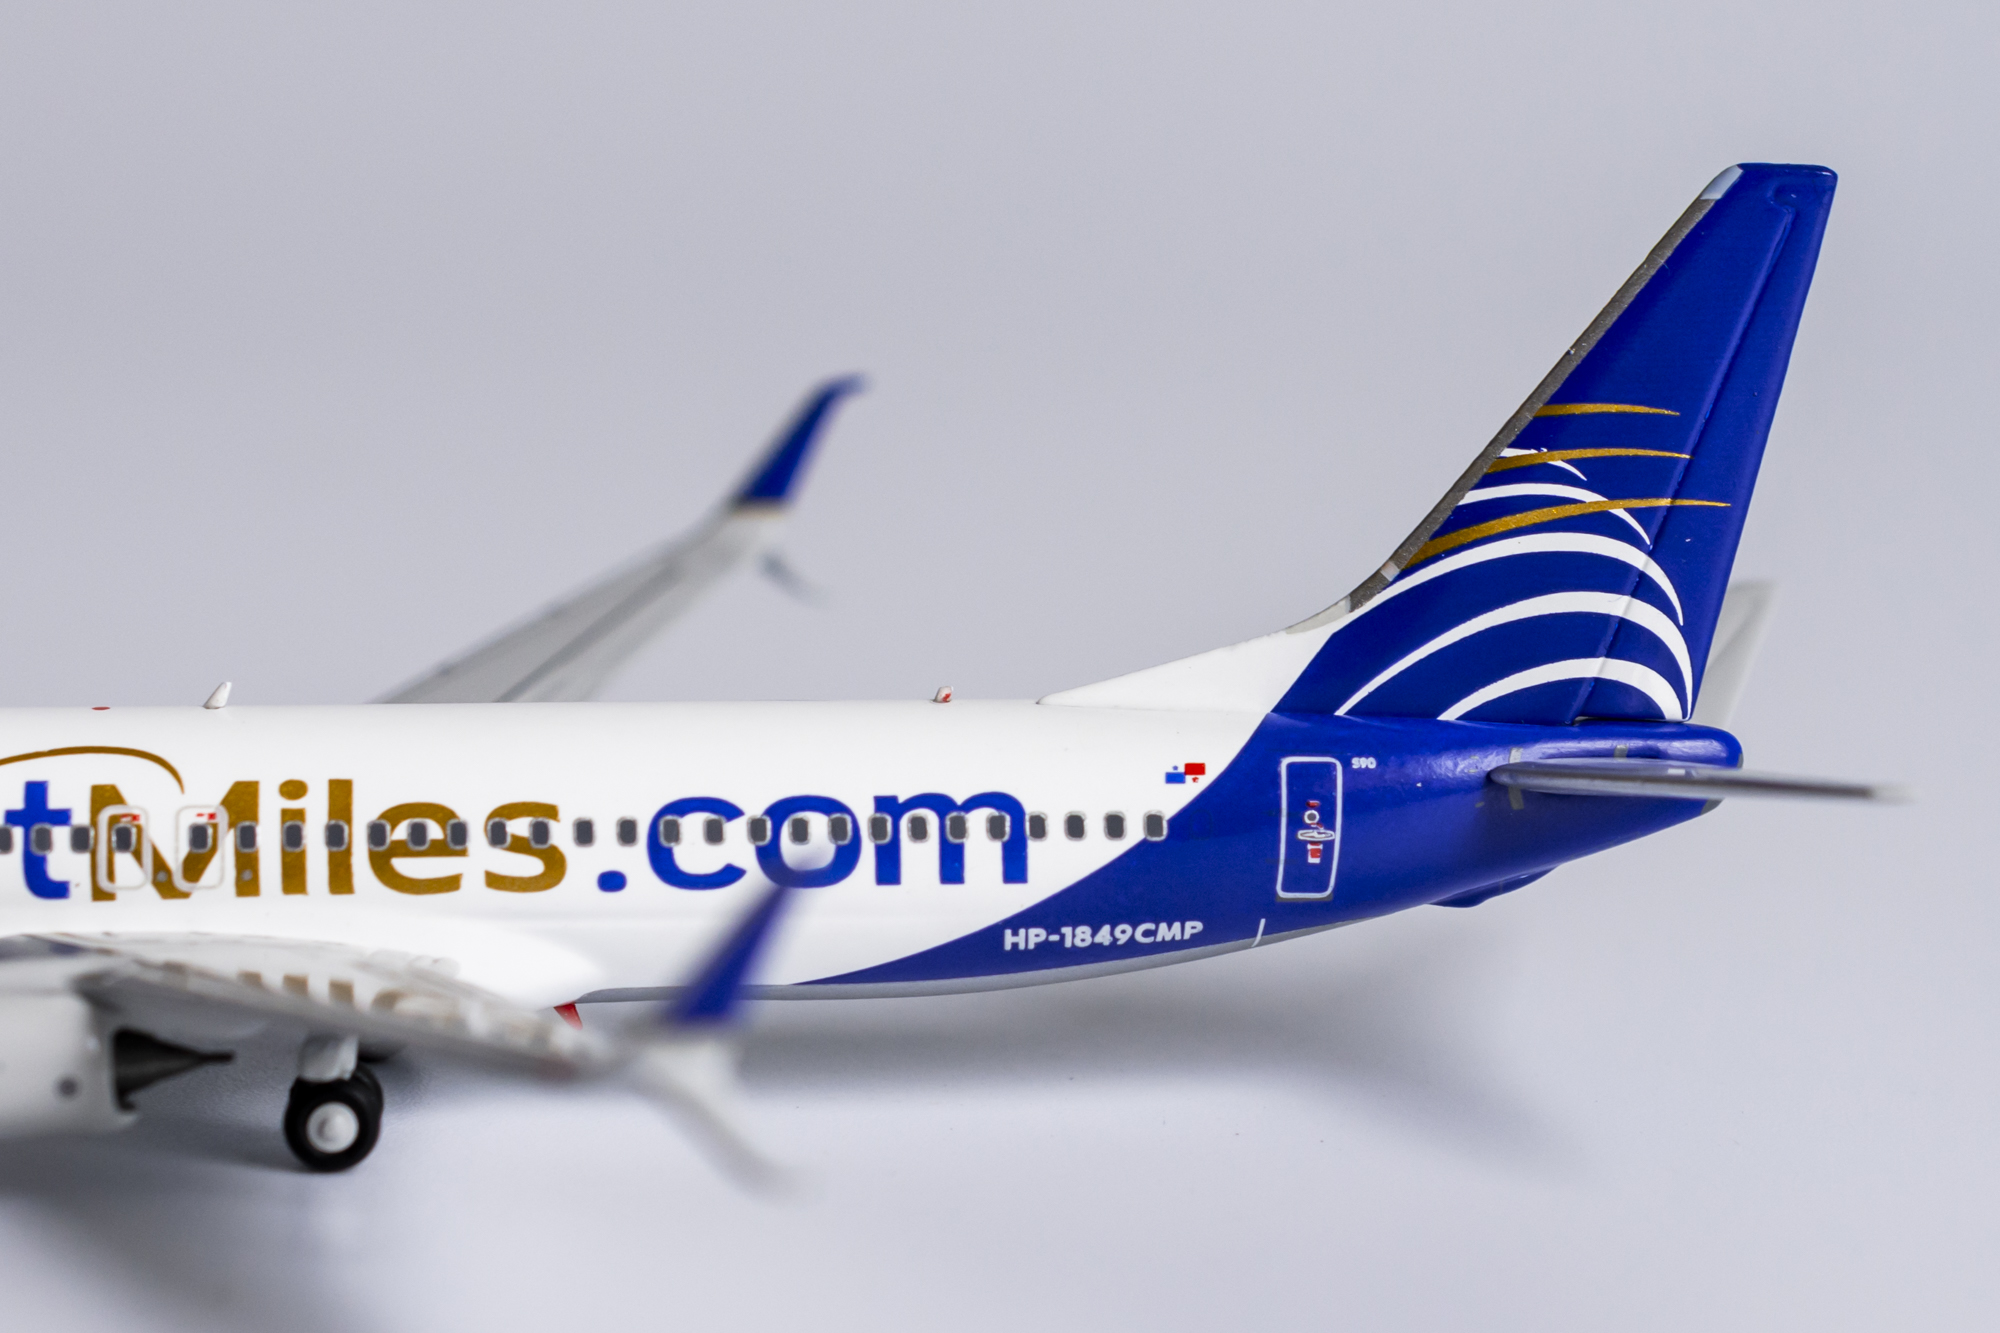  NGM58107 1:400 NG Model Copa Airlines B737-800(W) Reg  #HP-1537CMP (pre-Painted/pre-Built) : Arts, Crafts & Sewing